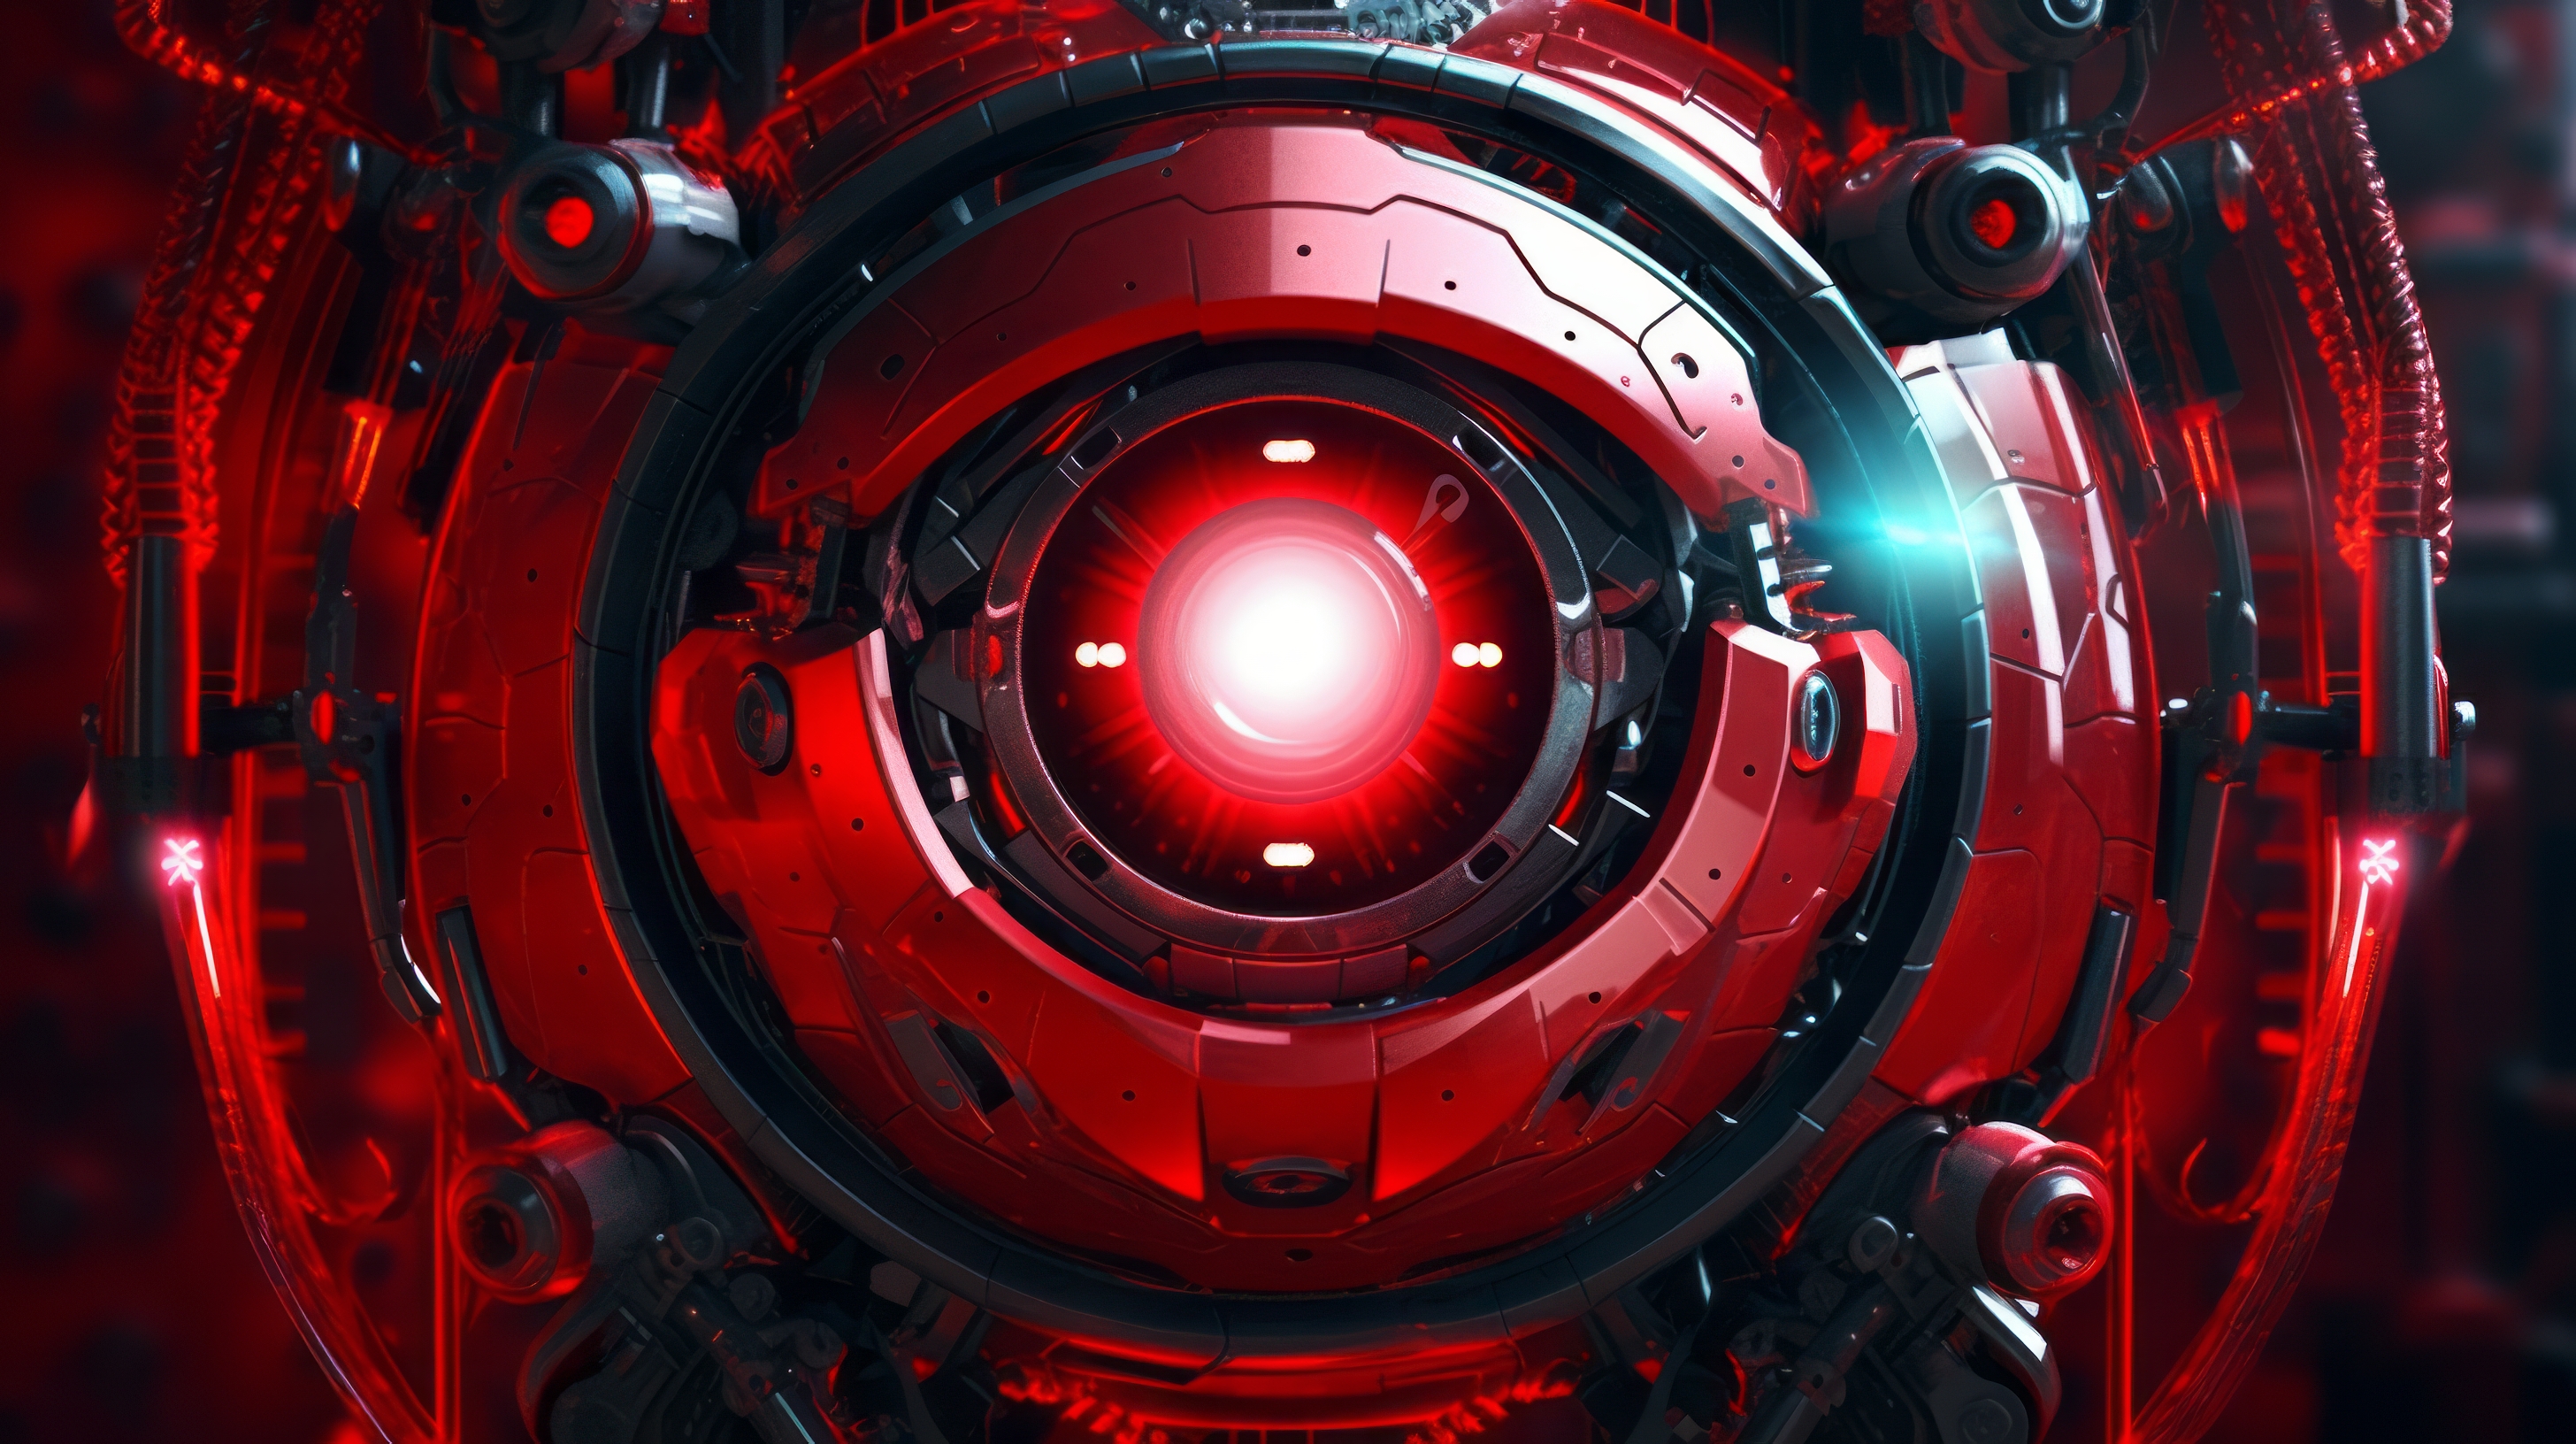 General 2912x1632 AI art illustration science fiction robot glowing eyes red technology